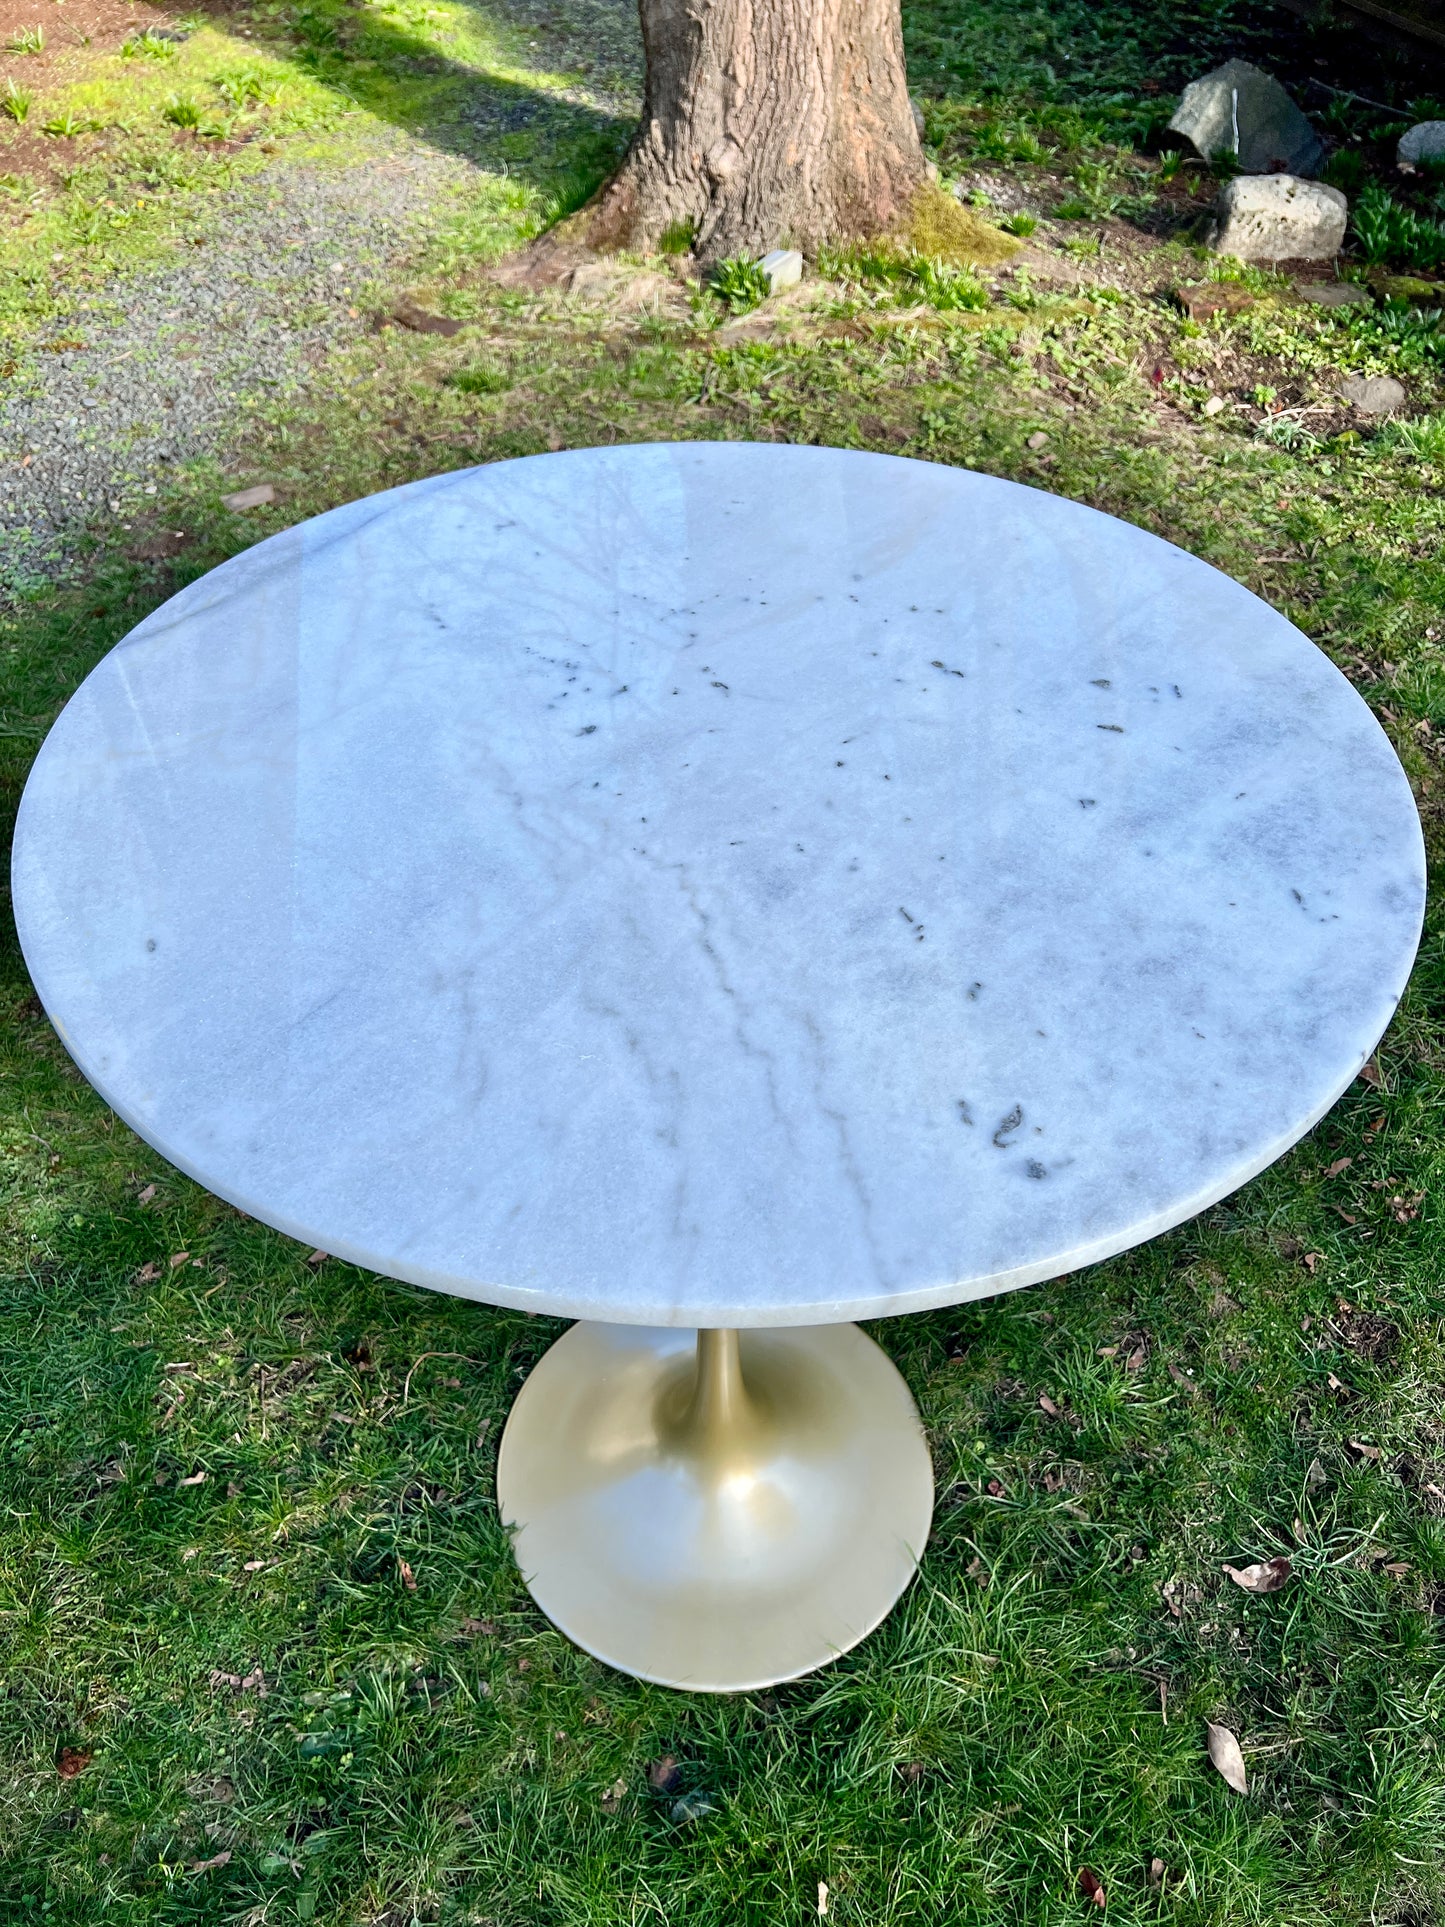 The Marvellous Marble Tables